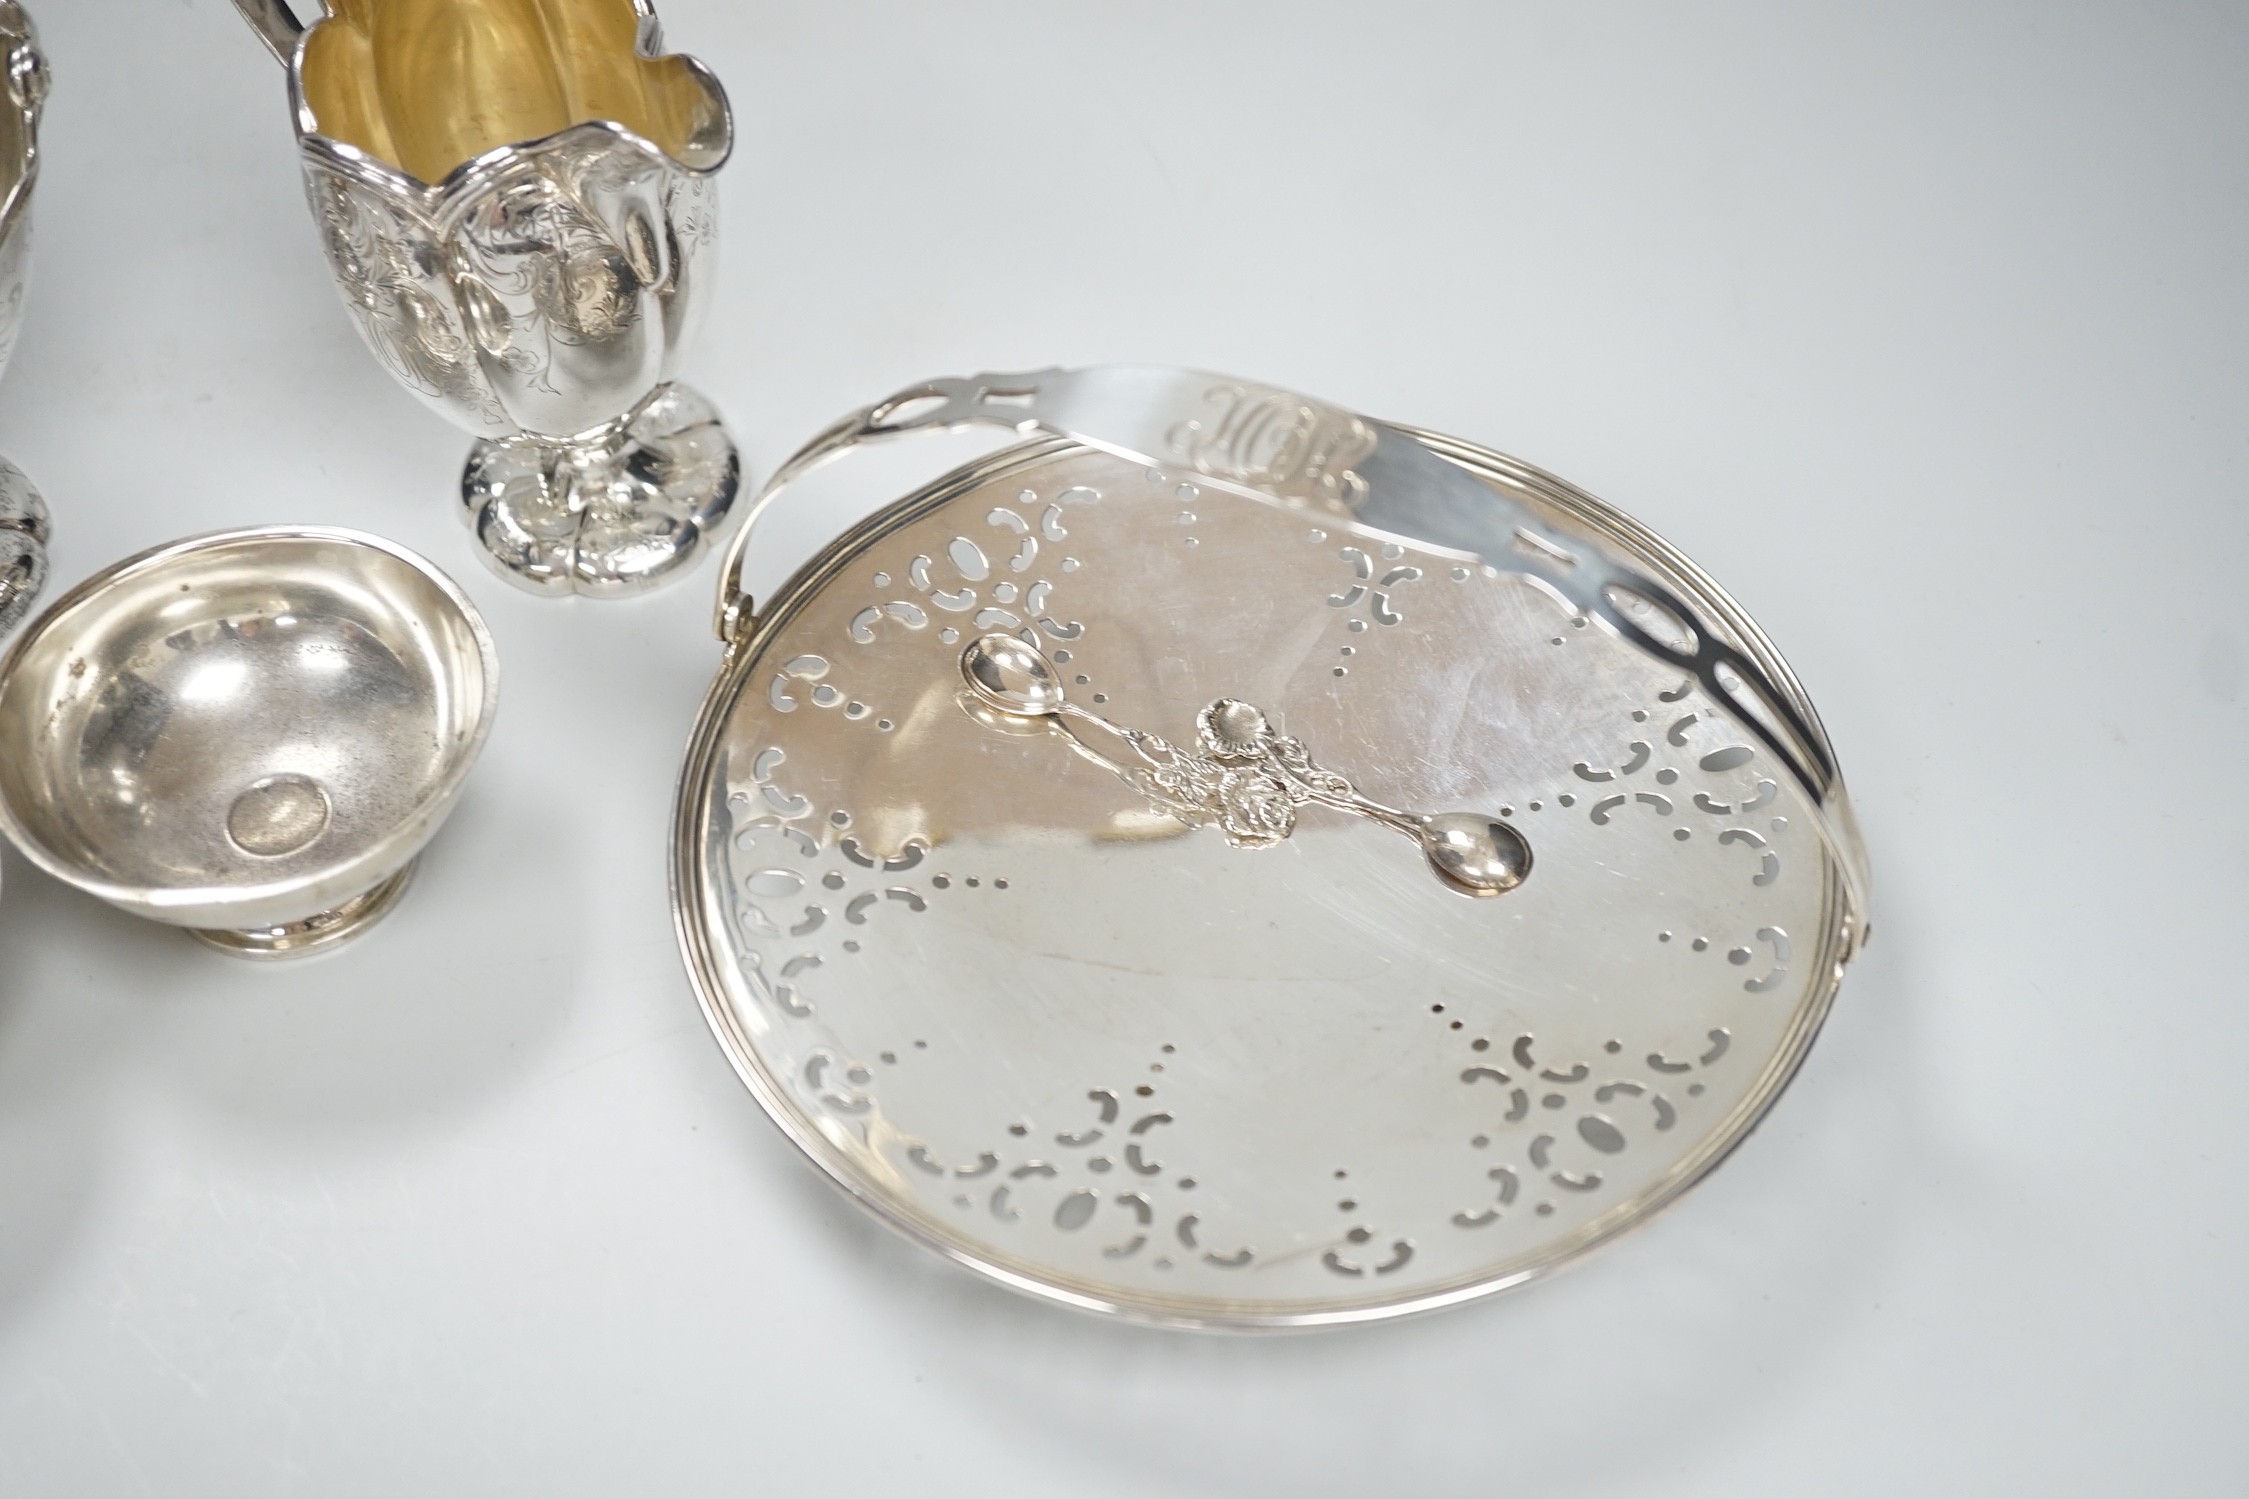 A sterling sugar basket, diameter 9.9cm, a sterling shallow basket dish, sterling cream jug and pair of sterling salts with spoons, 20.6oz.